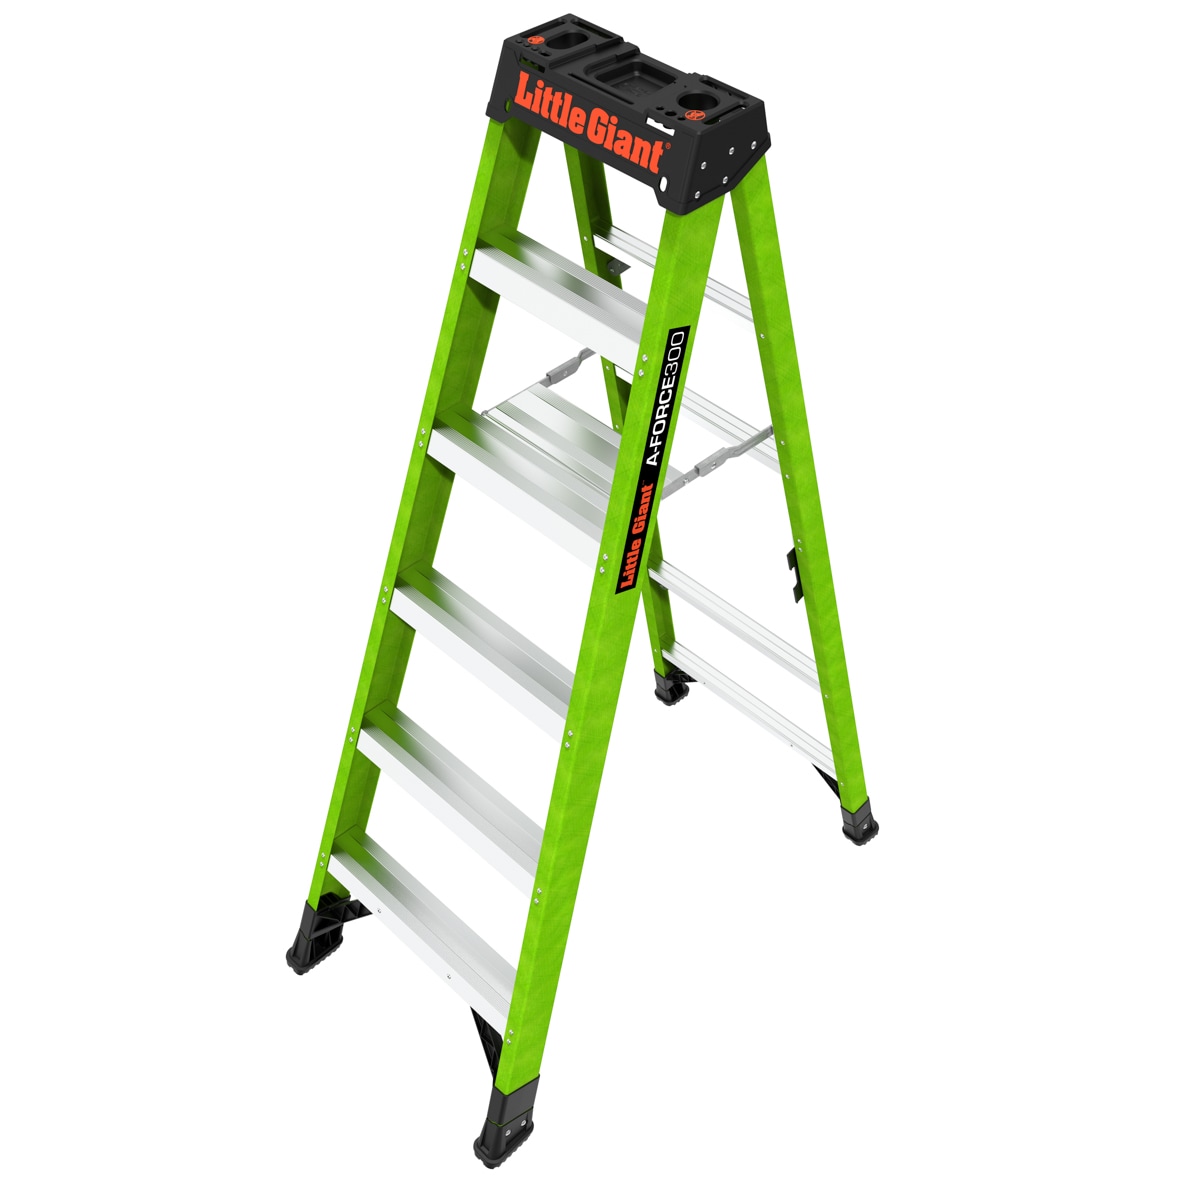 Little Giant Ladders Step Ladders at